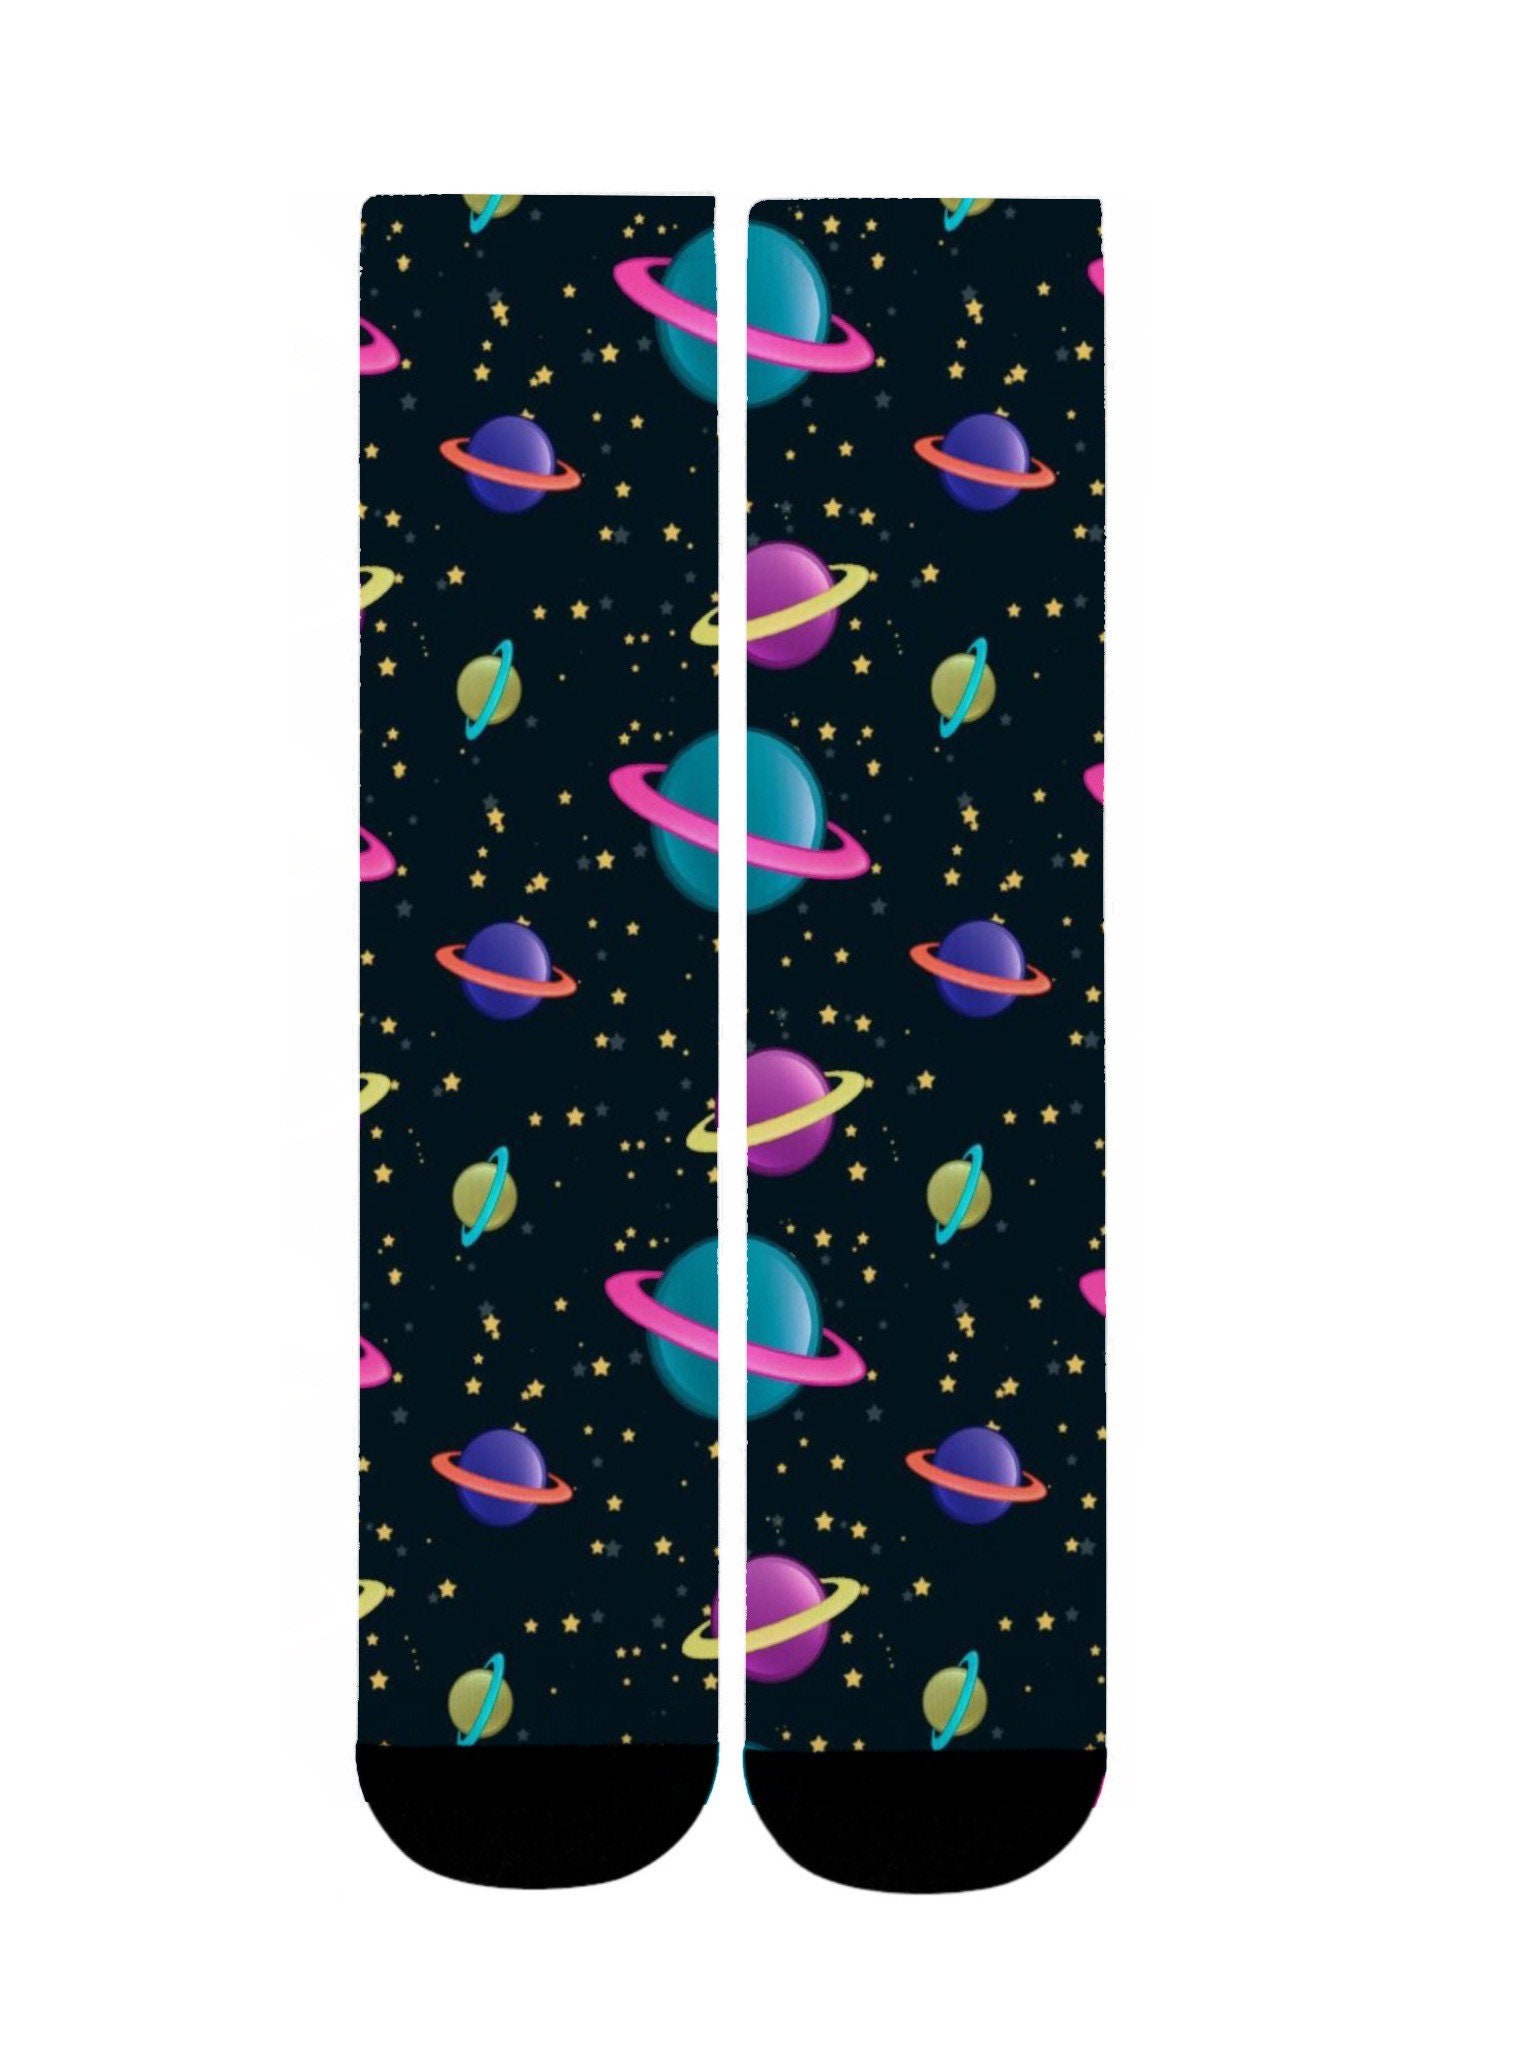 Space planets Cool Socks UnisexGraphic | Etsy